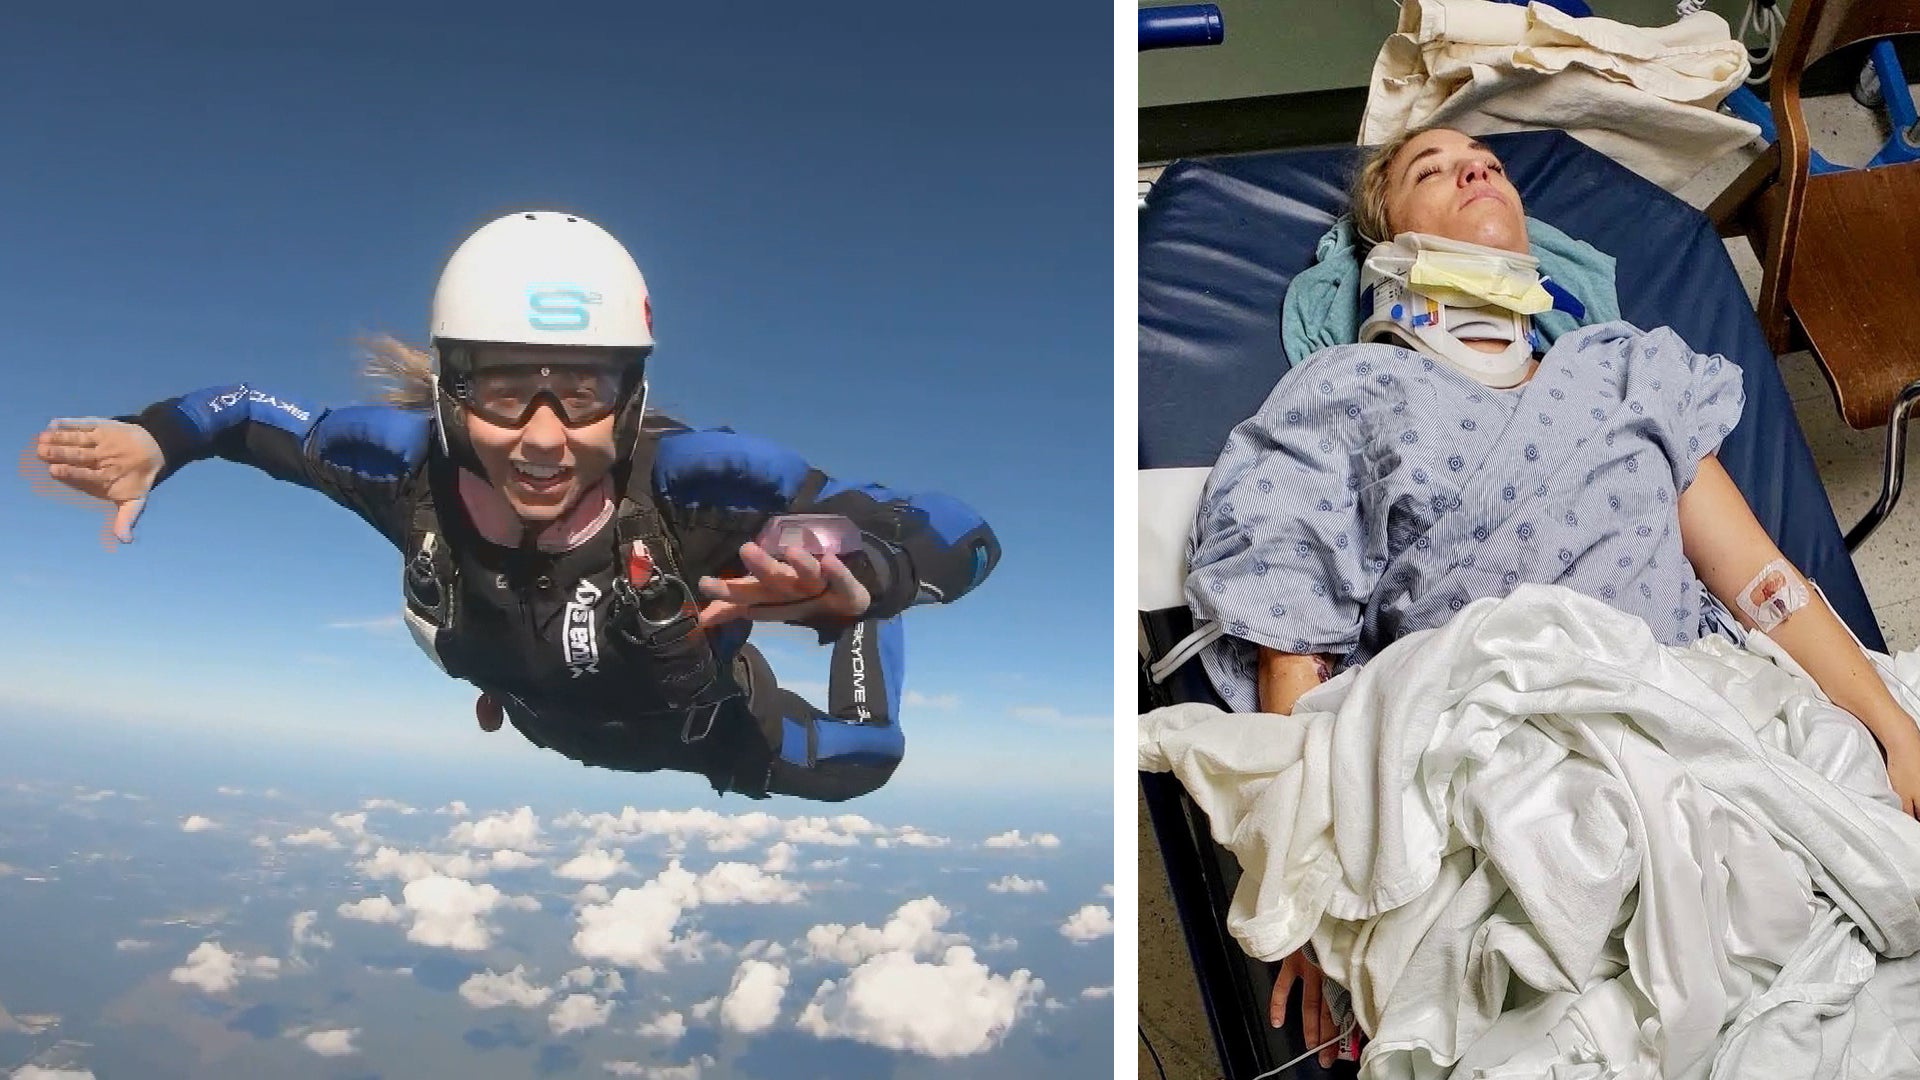 How This Skydiver Survived a Horrific Fall